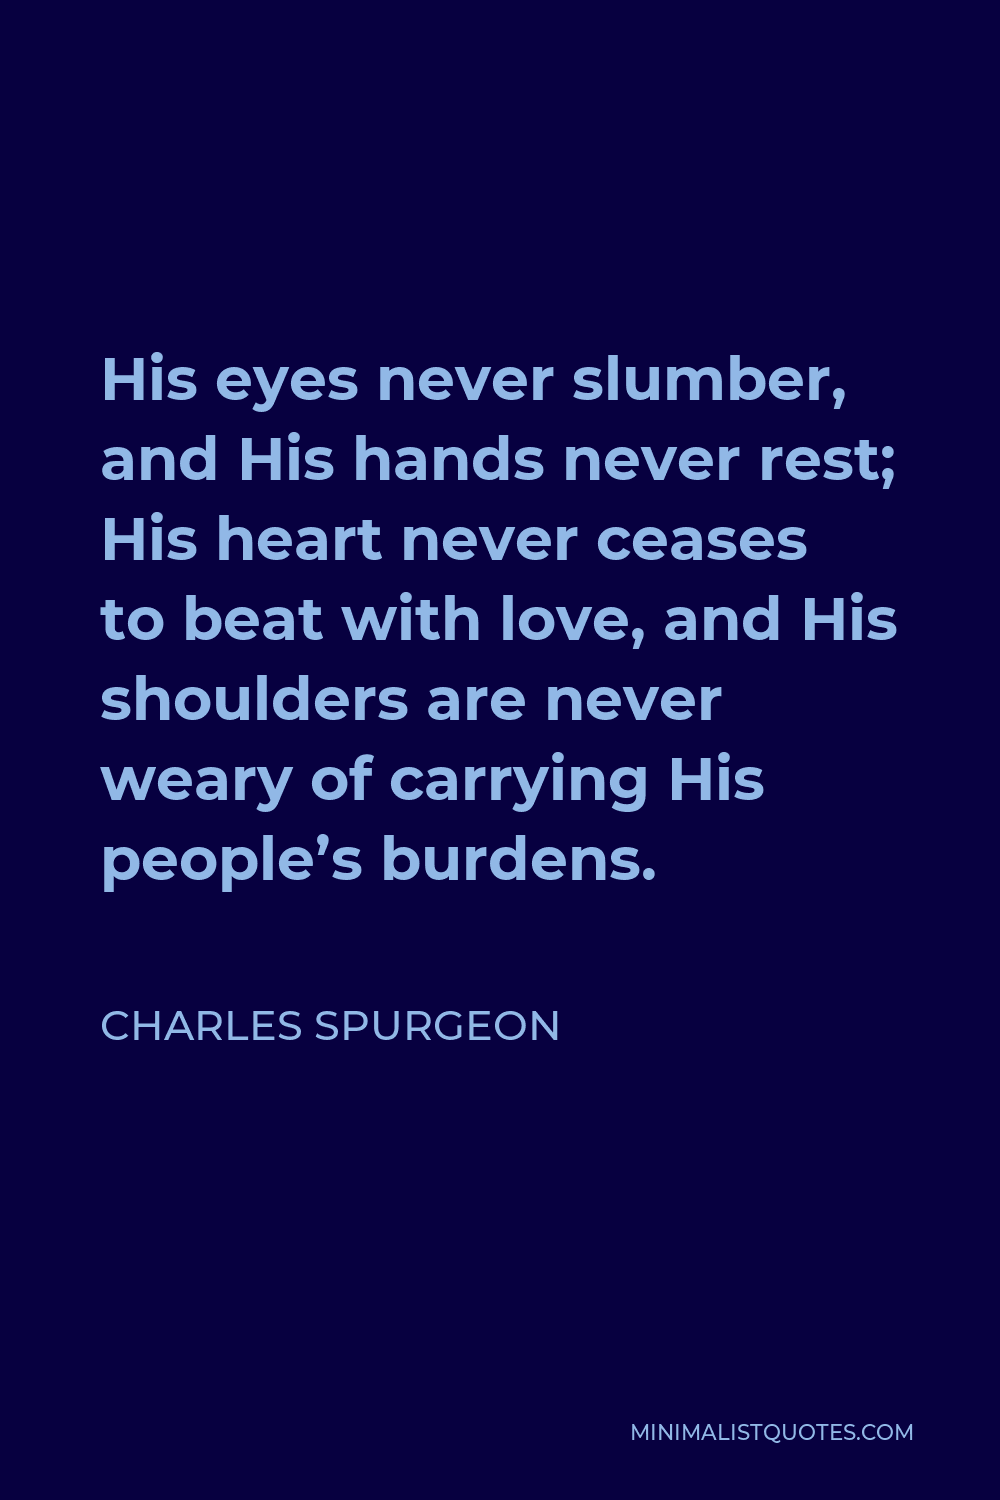 Charles Spurgeon Quote - His eyes never slumber, and His hands never rest; His heart never ceases to beat with love, and His shoulders are never weary of carrying His people’s burdens.